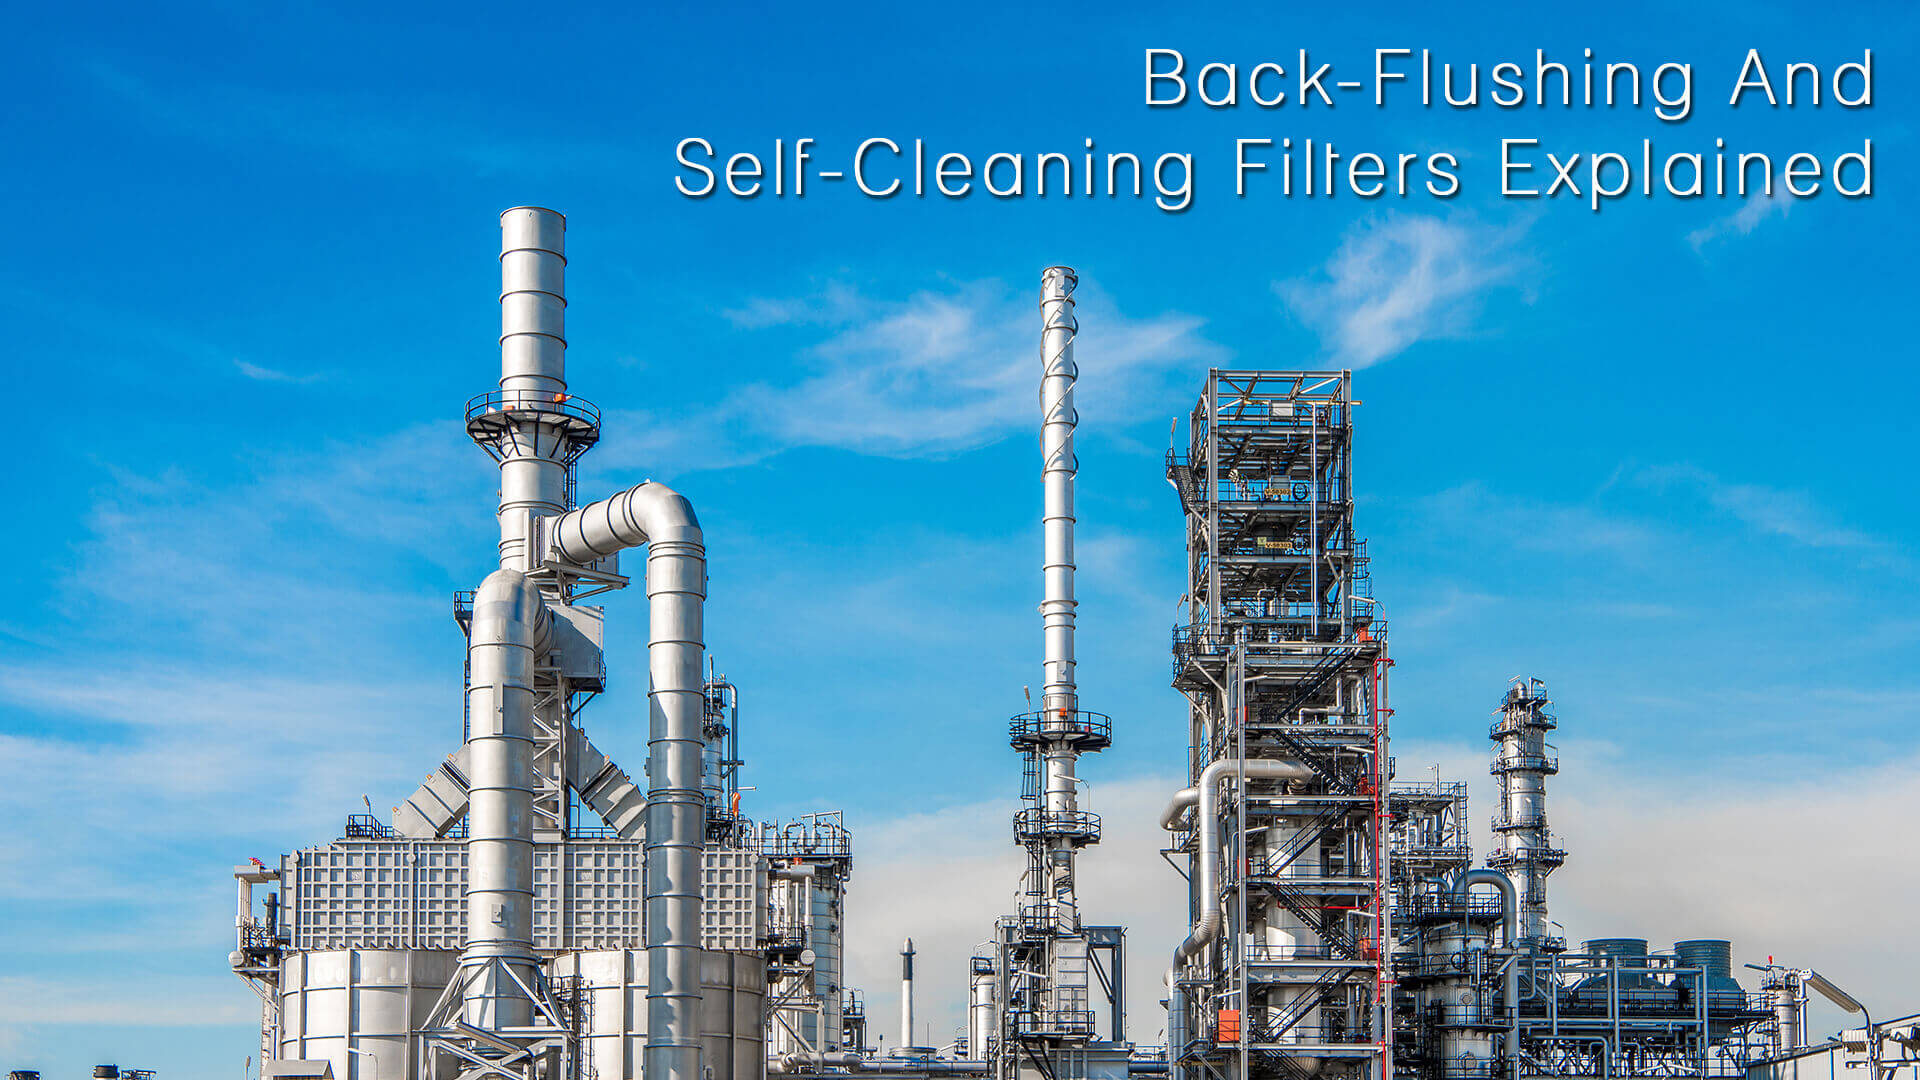 Back-Flushing And Self-Cleaning Filters Explained